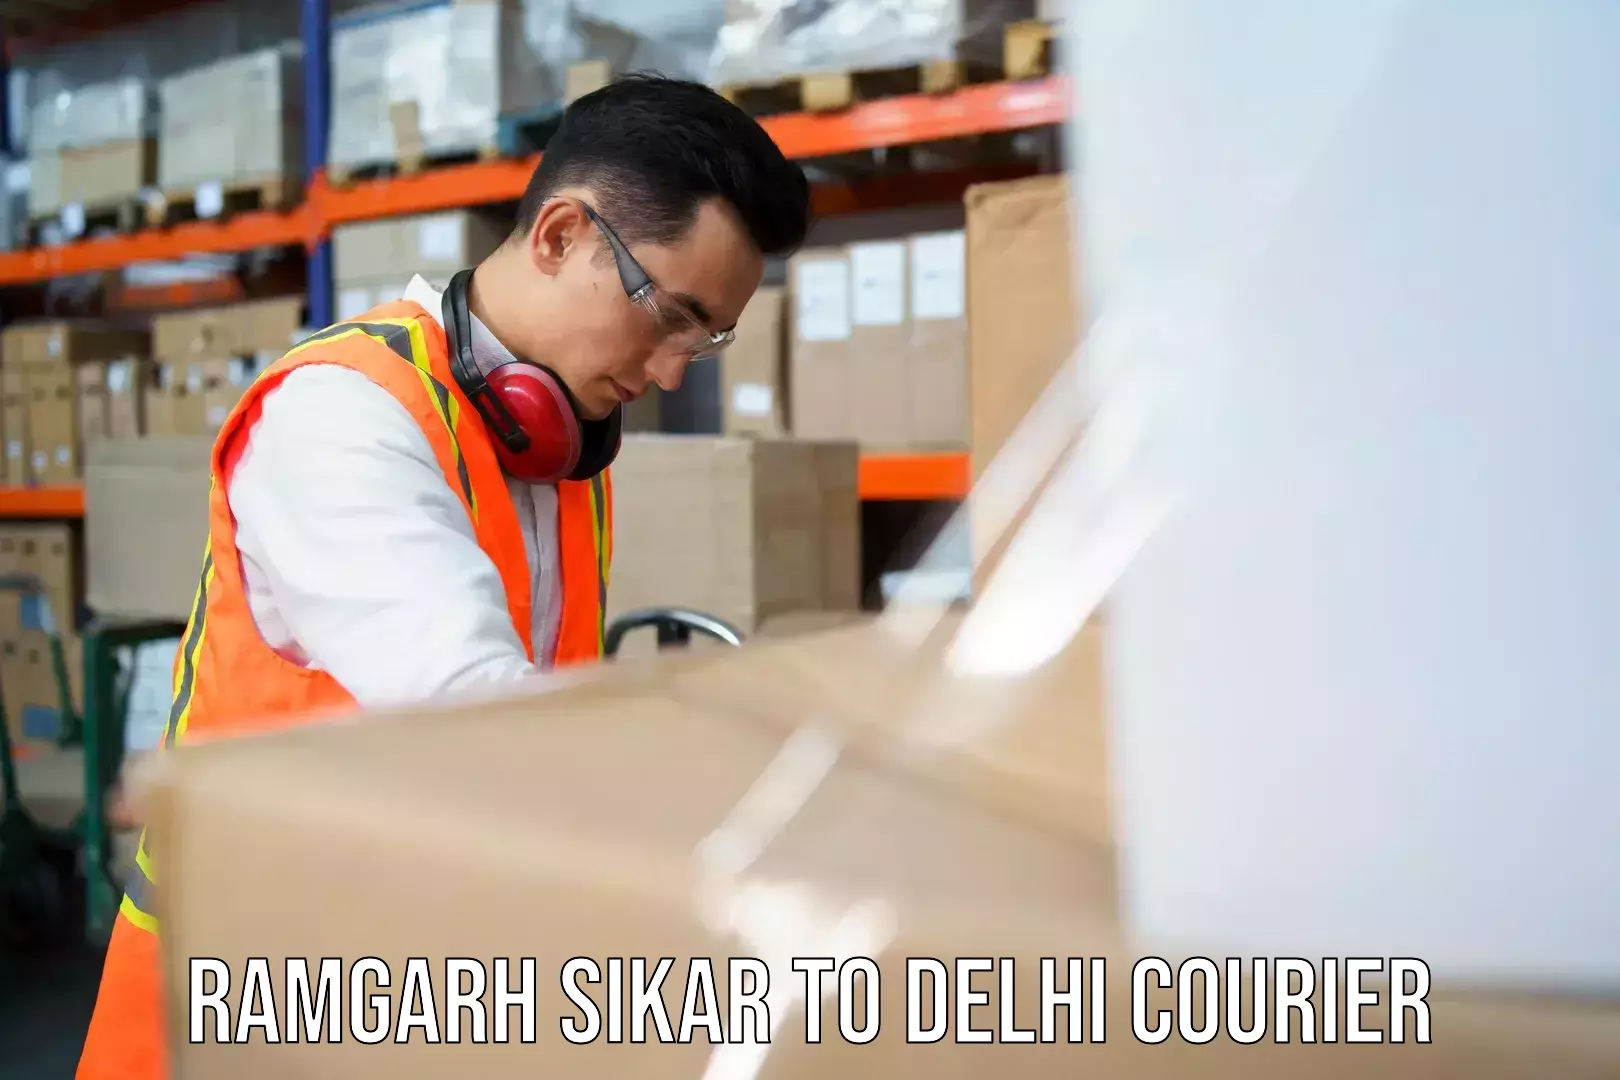 End-to-end delivery Ramgarh Sikar to University of Delhi